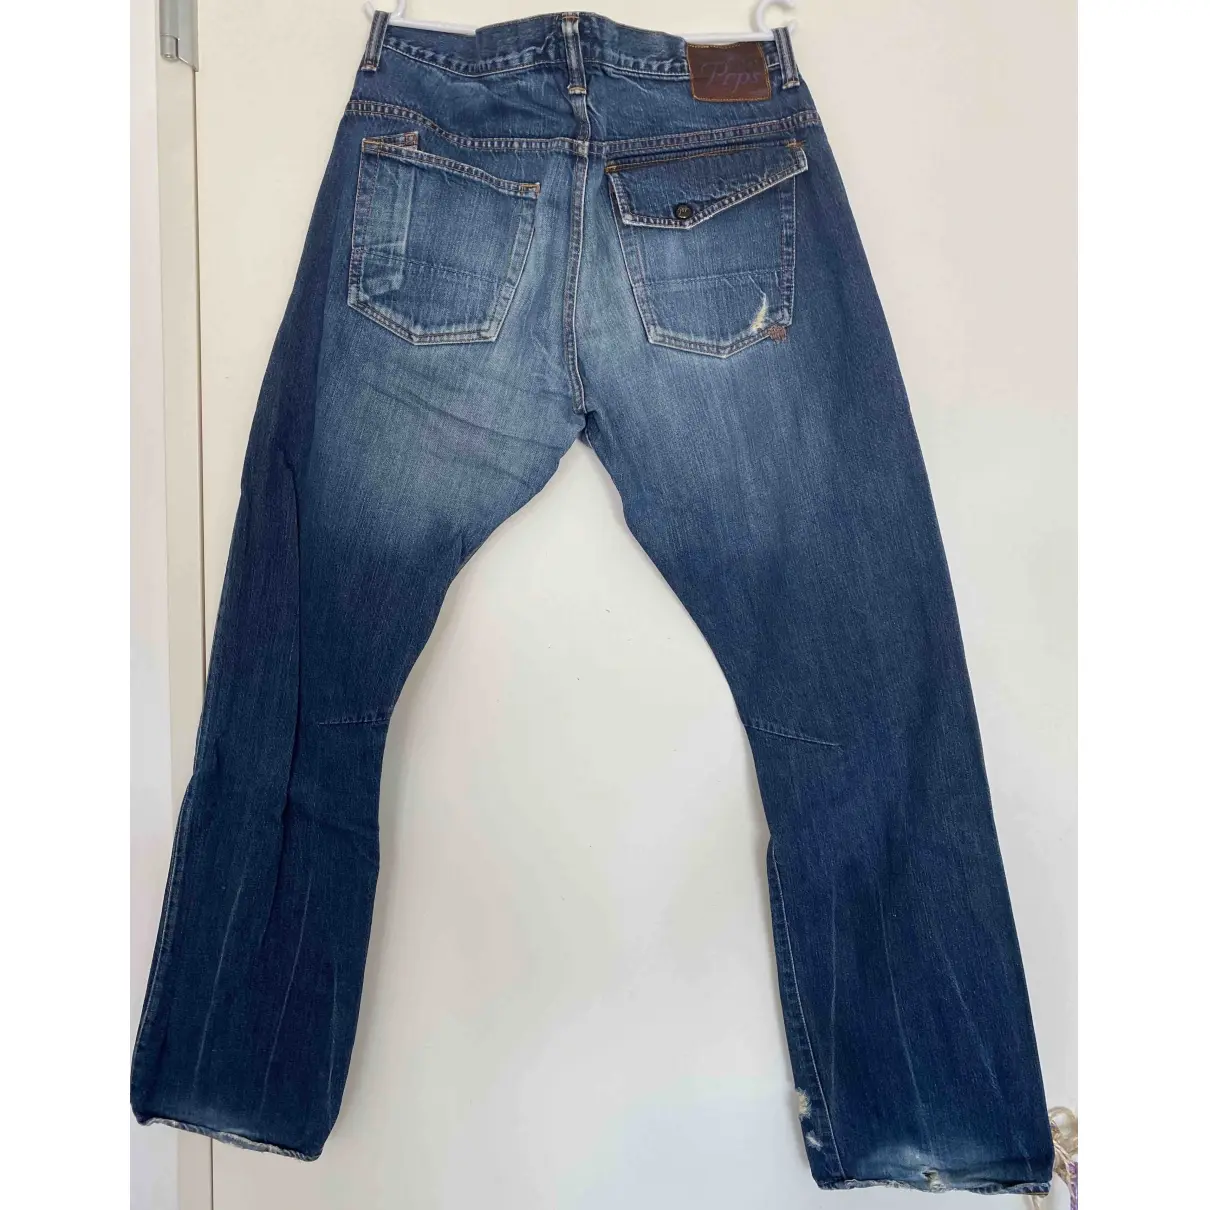 Buy Prps Straight jeans online